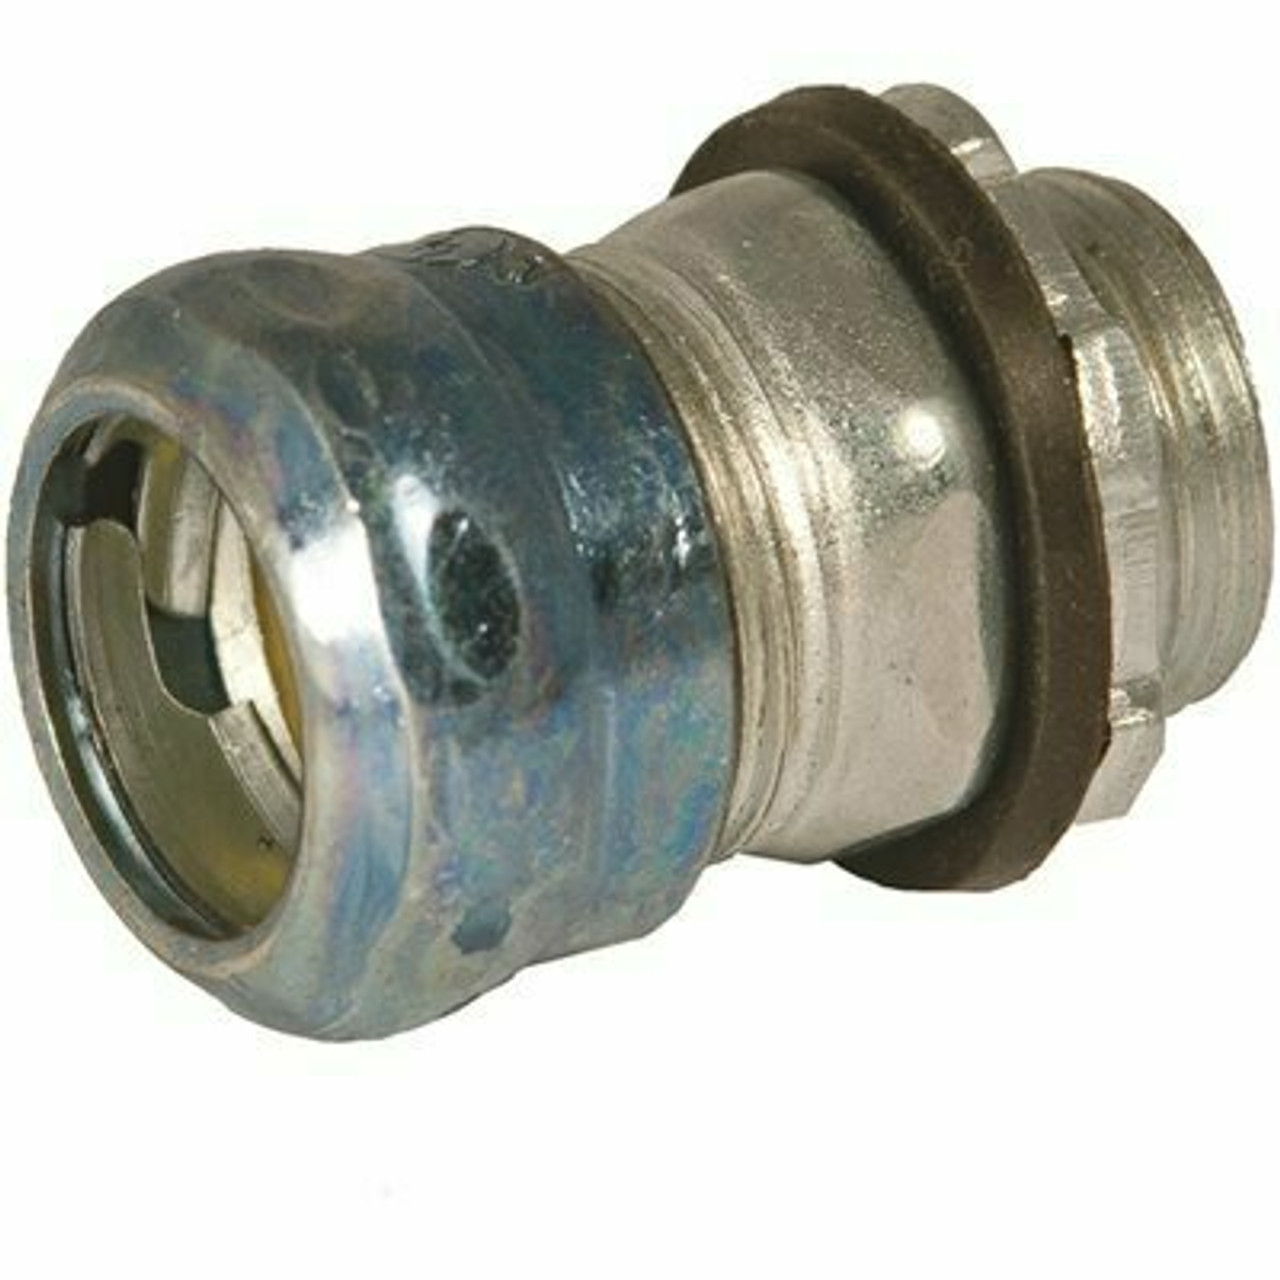 Raco 1 In. Emt Raintight Compression Connector, Uninsulated - 312715775